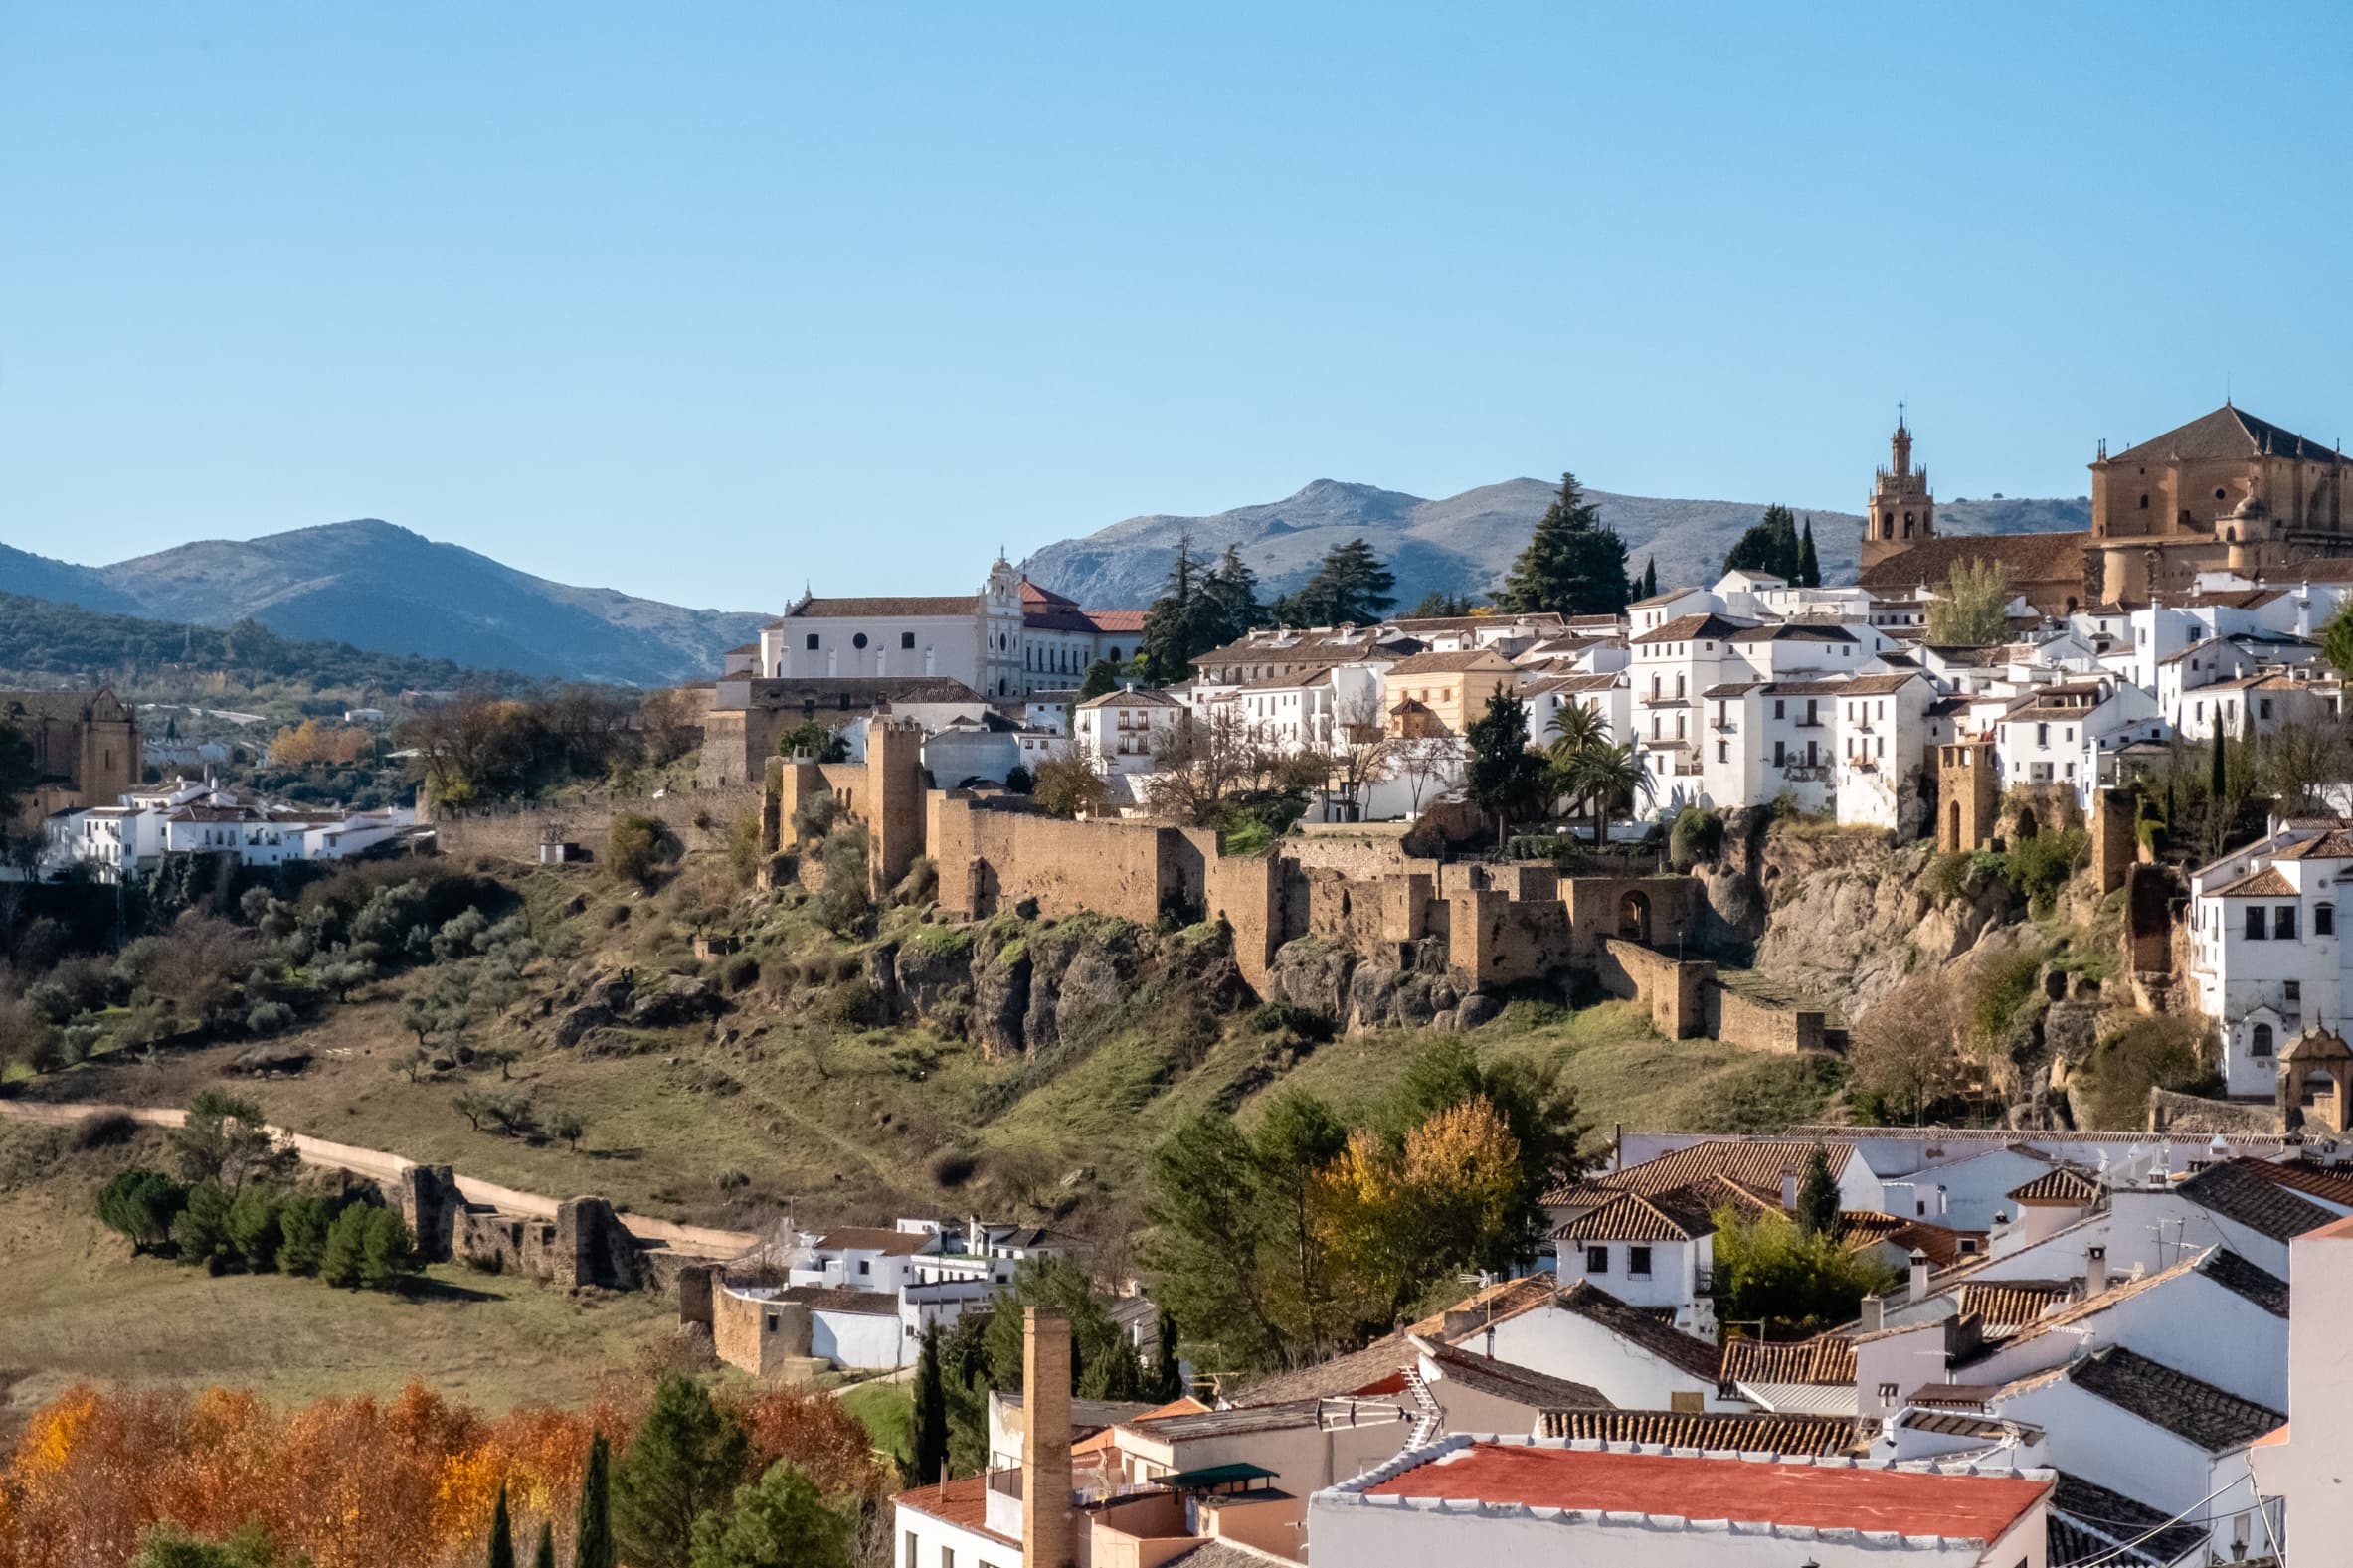 East side of Ronda with old city walls